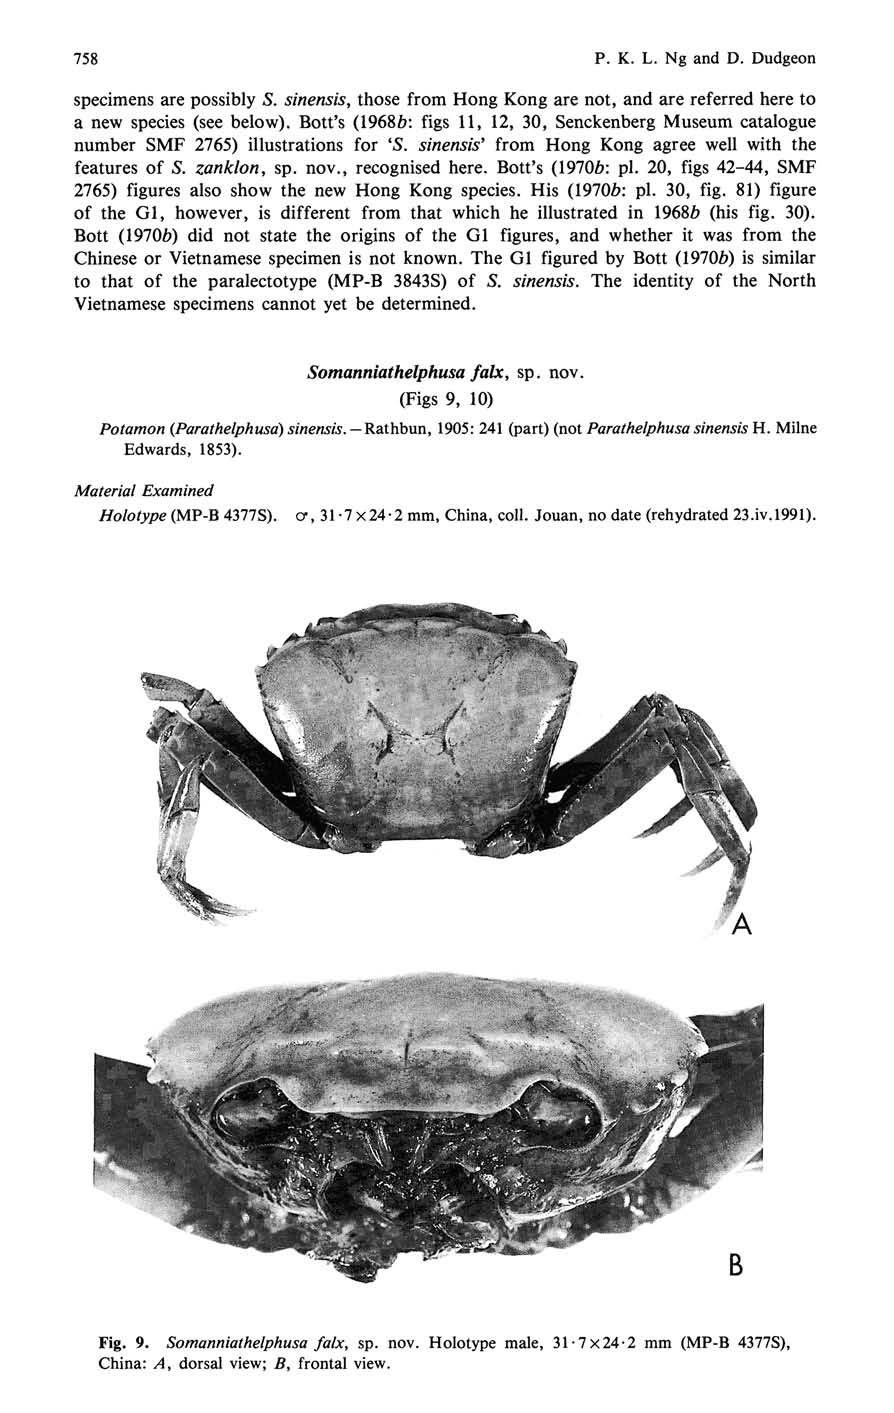 758 P. K. L. Ng and D. Dudgeon specimens are possibly S. sinensis, those from Hong Kong are not, and are referred here to a new species (see below). Bott's (1968Z?